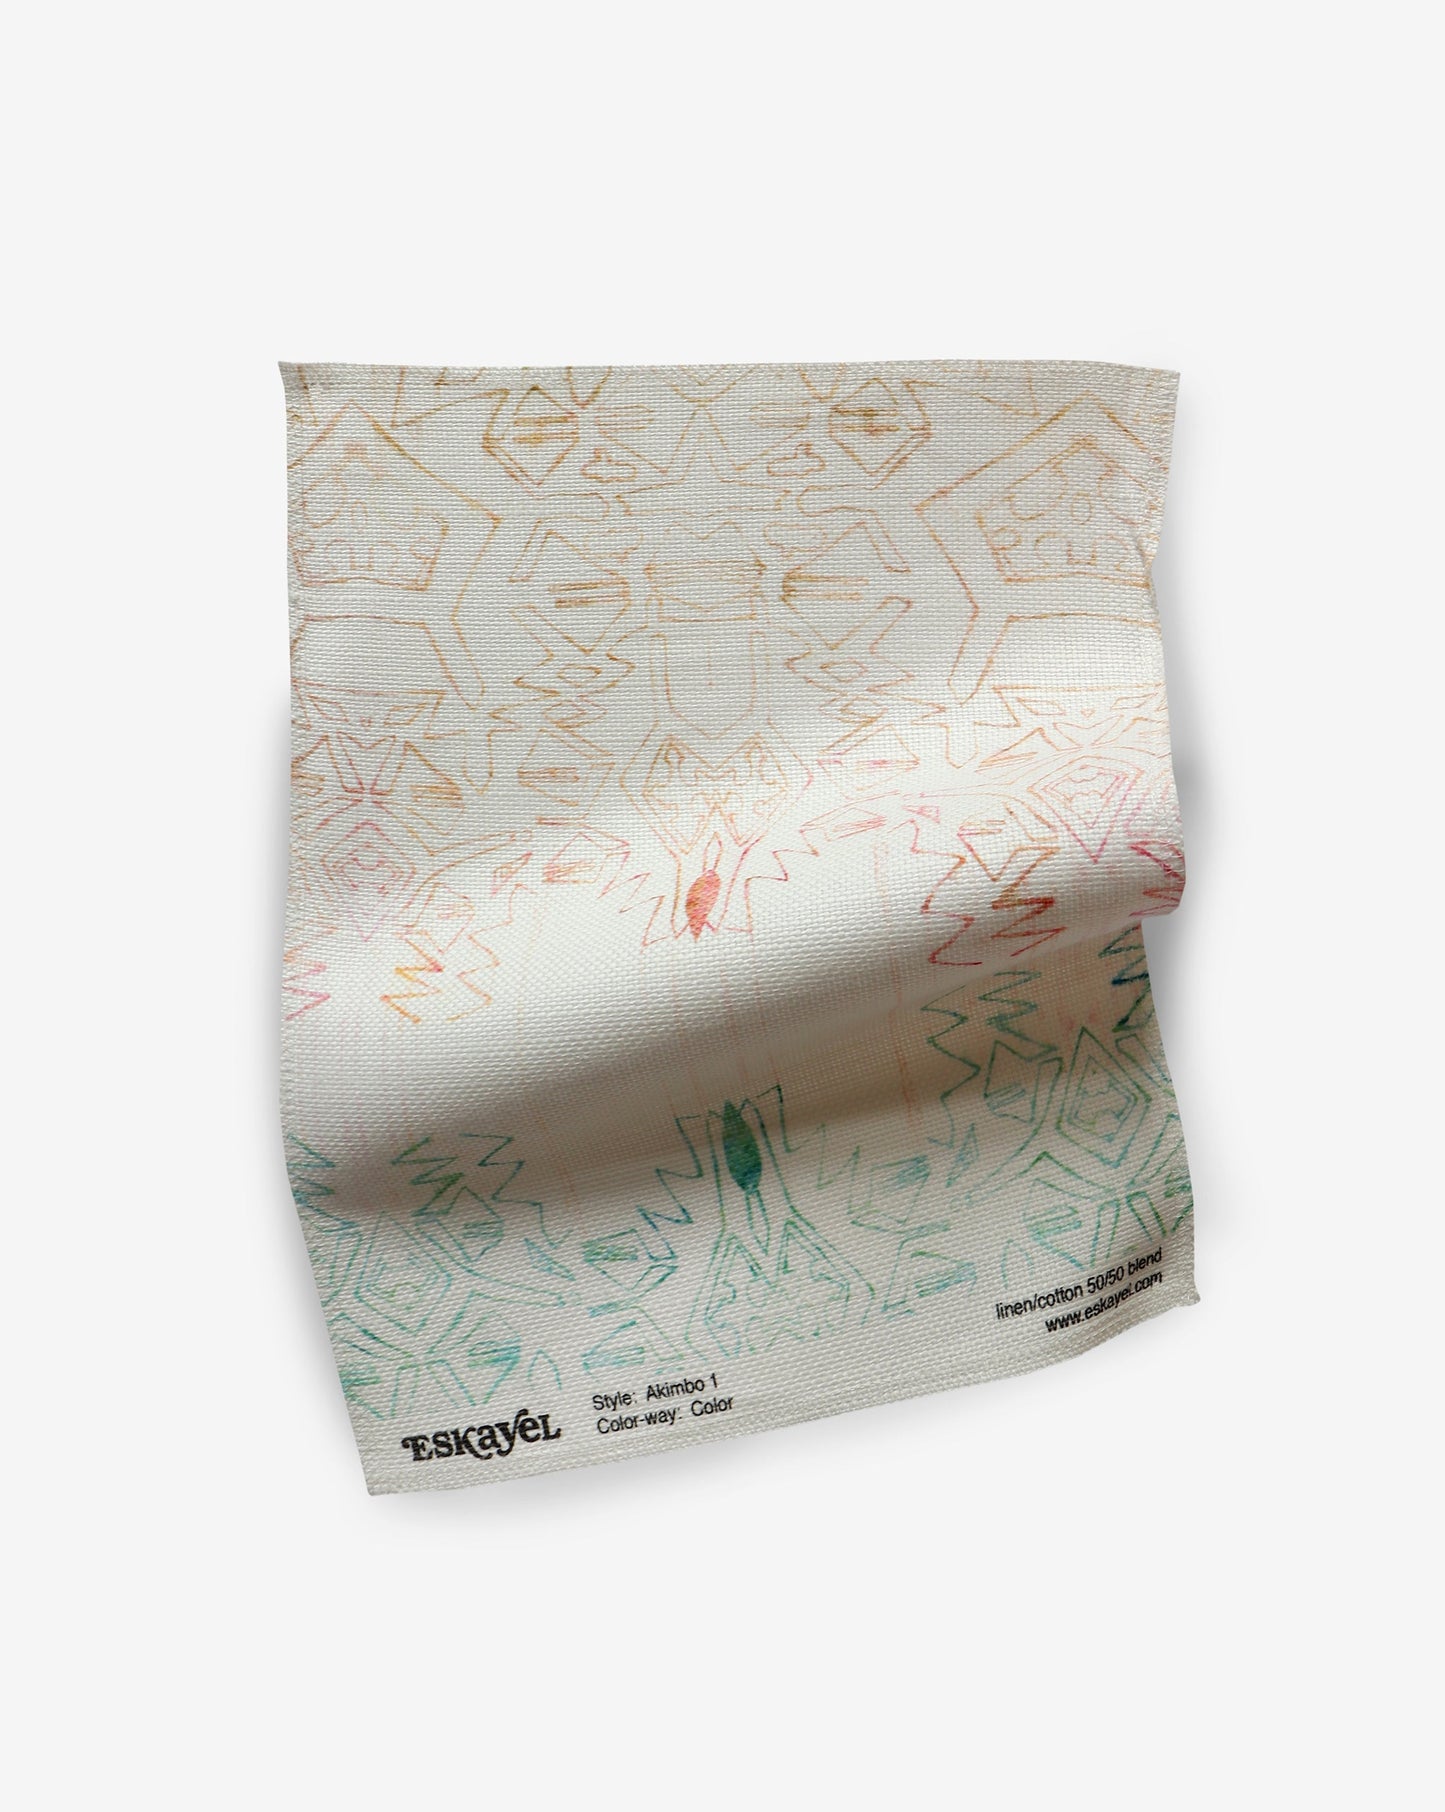 A piece of Akimbo 1 Fabric Color with a geometric pattern on it